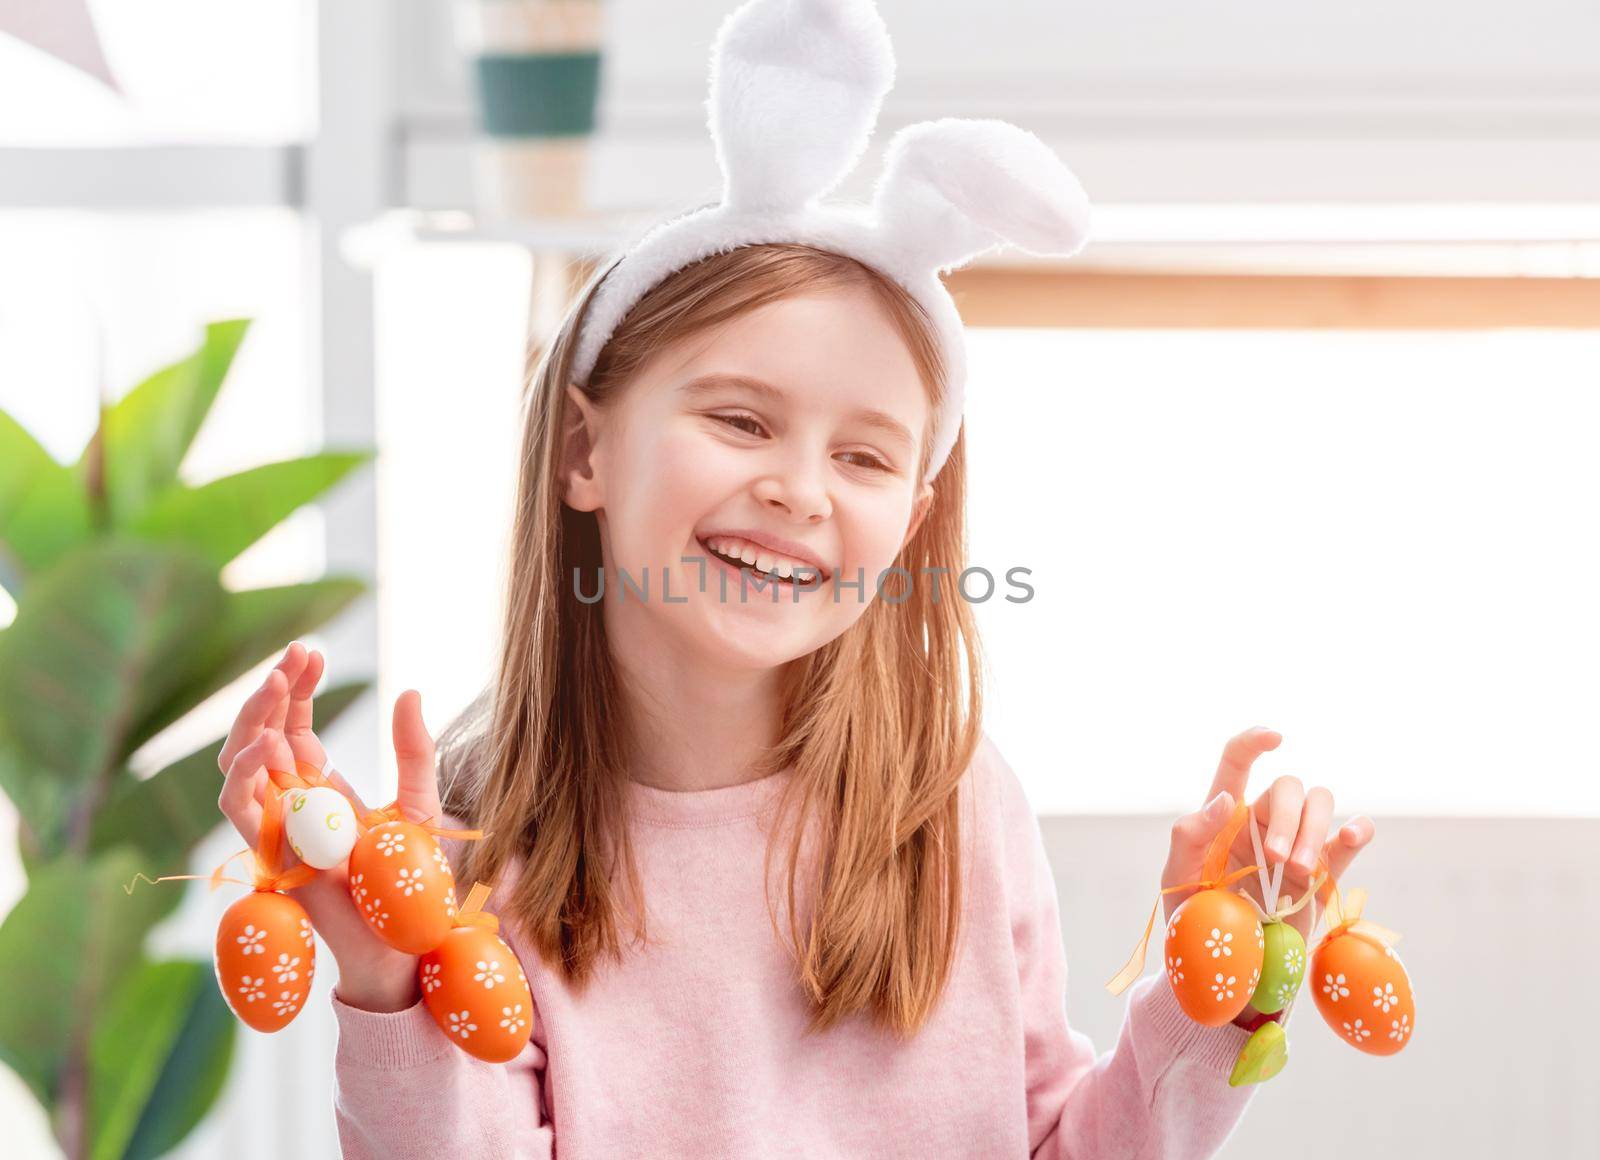 Beautiful portrait of cute little girl wearing bunny ears and holding painted Easter eggs in her hands